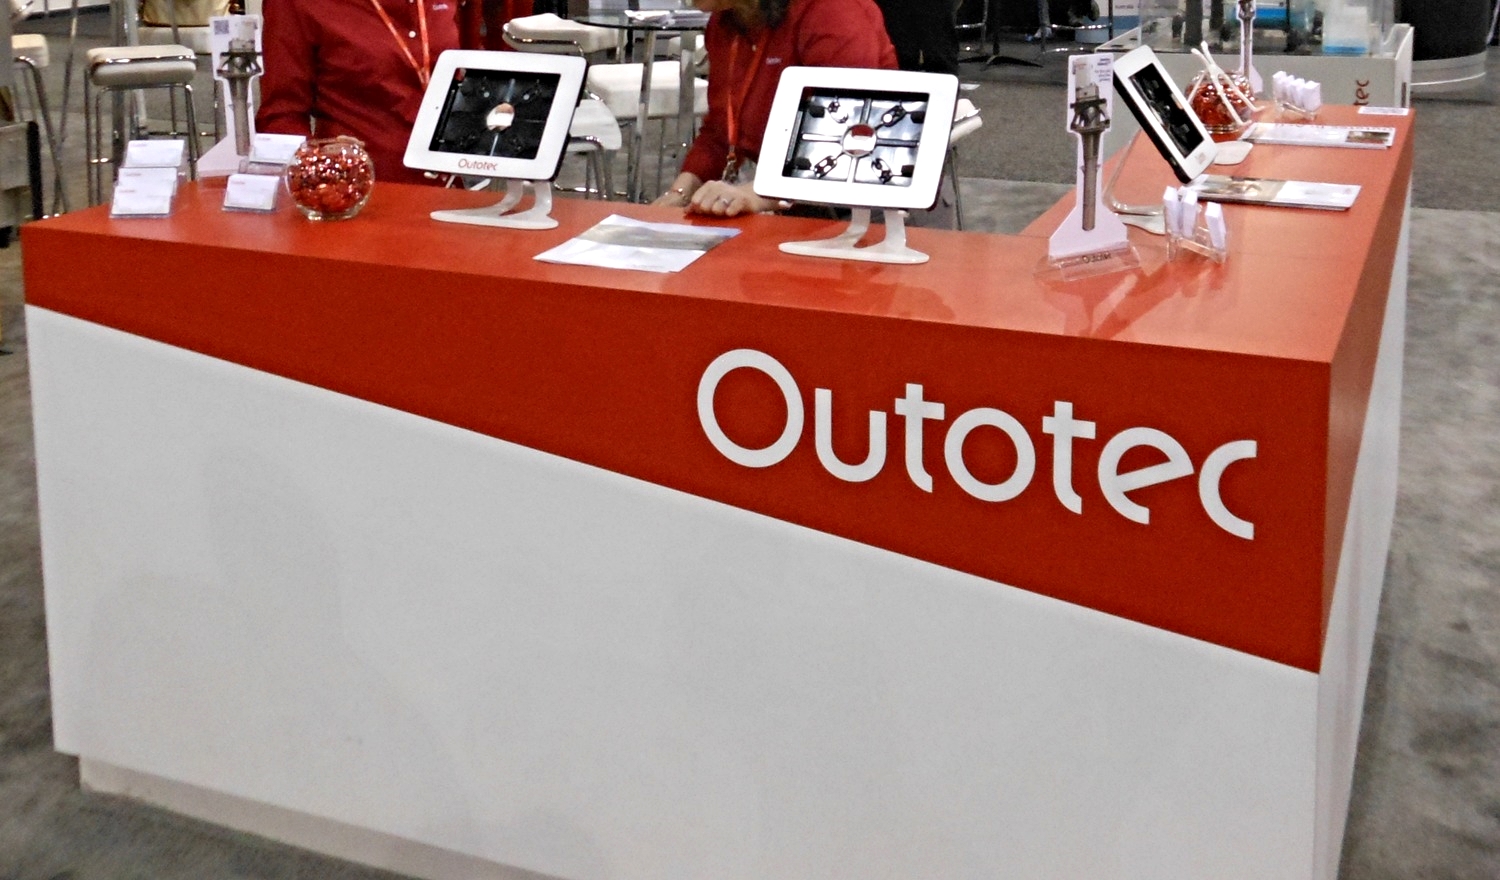 Outotec's exhibit featured a large hanging sign, custom millwork and modern furniture